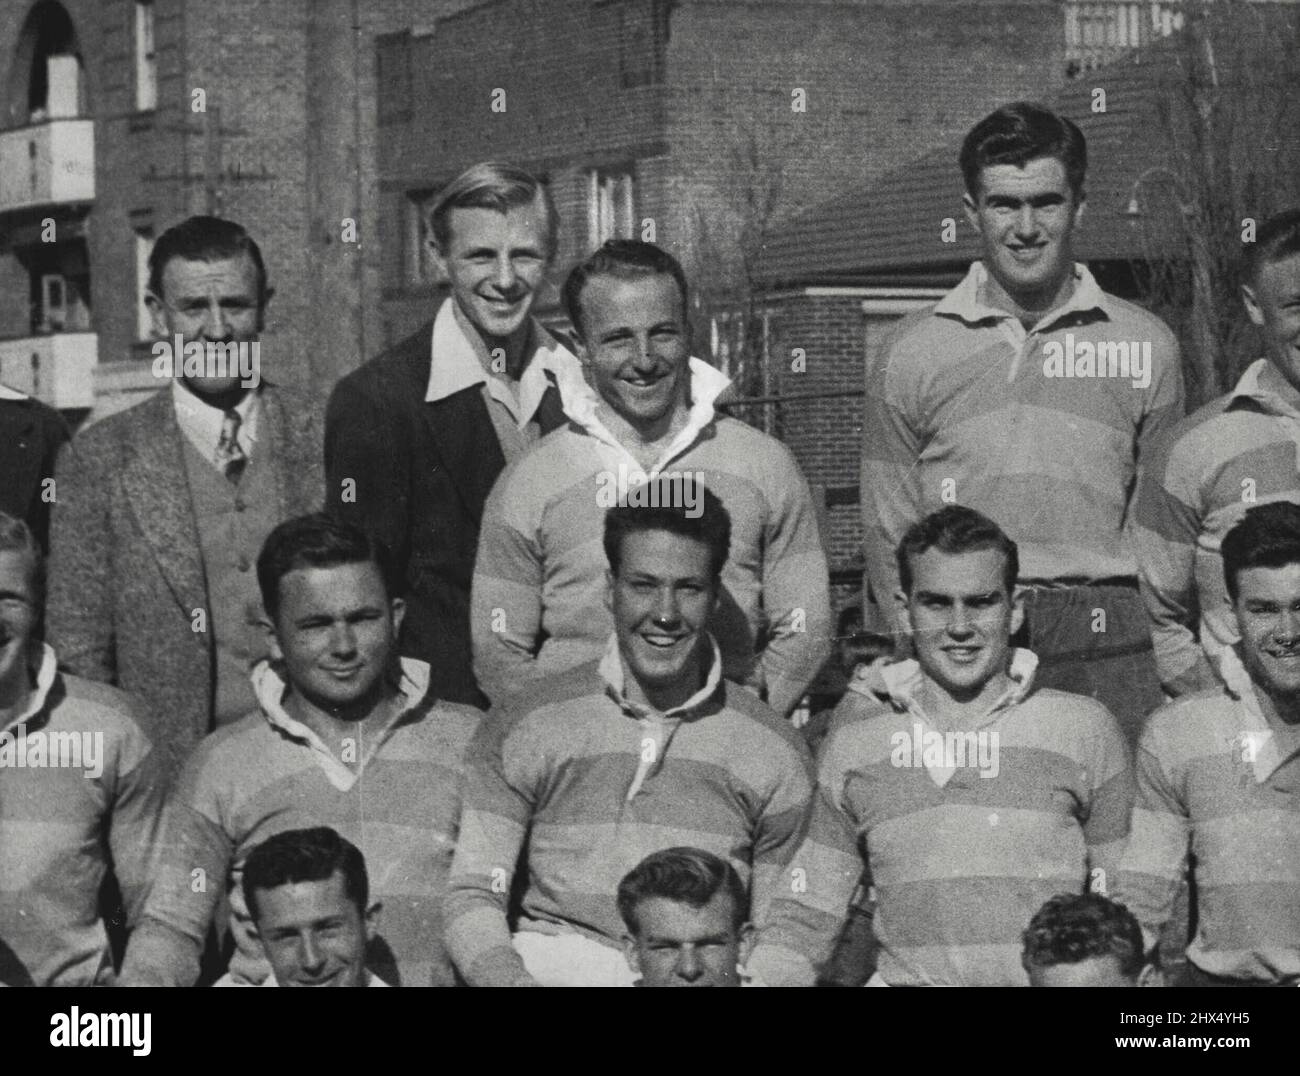 Rugby Union Teams - Aust. & Local To 1960. June 17, 1954. Stock Photo